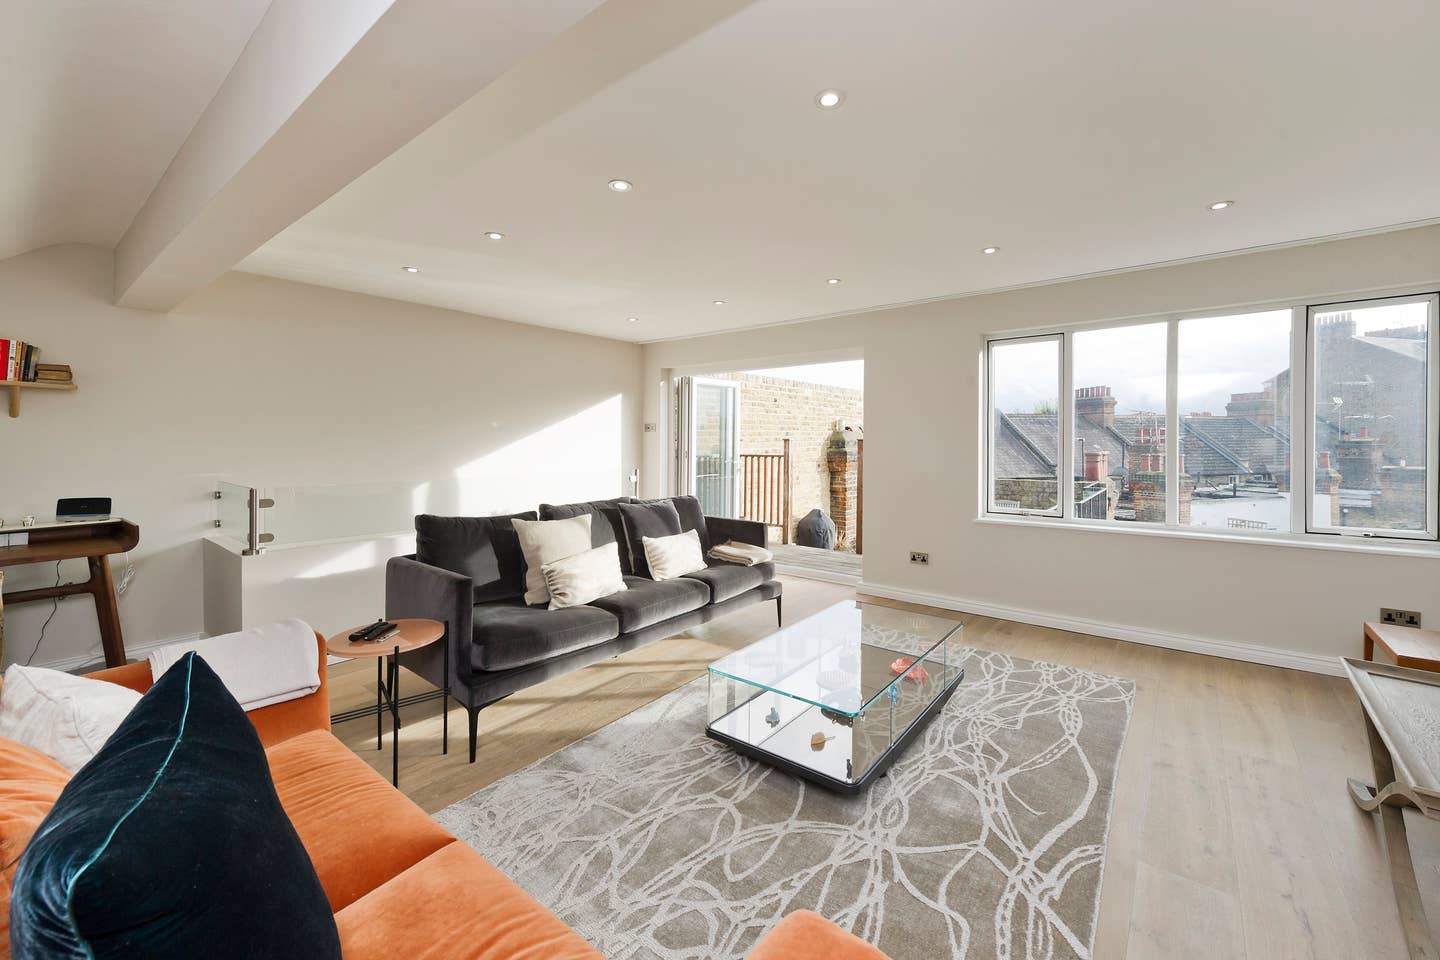 Property Image 1 - Beautiful Spacious One Bedroom in Battersea Park with Roof Terrace